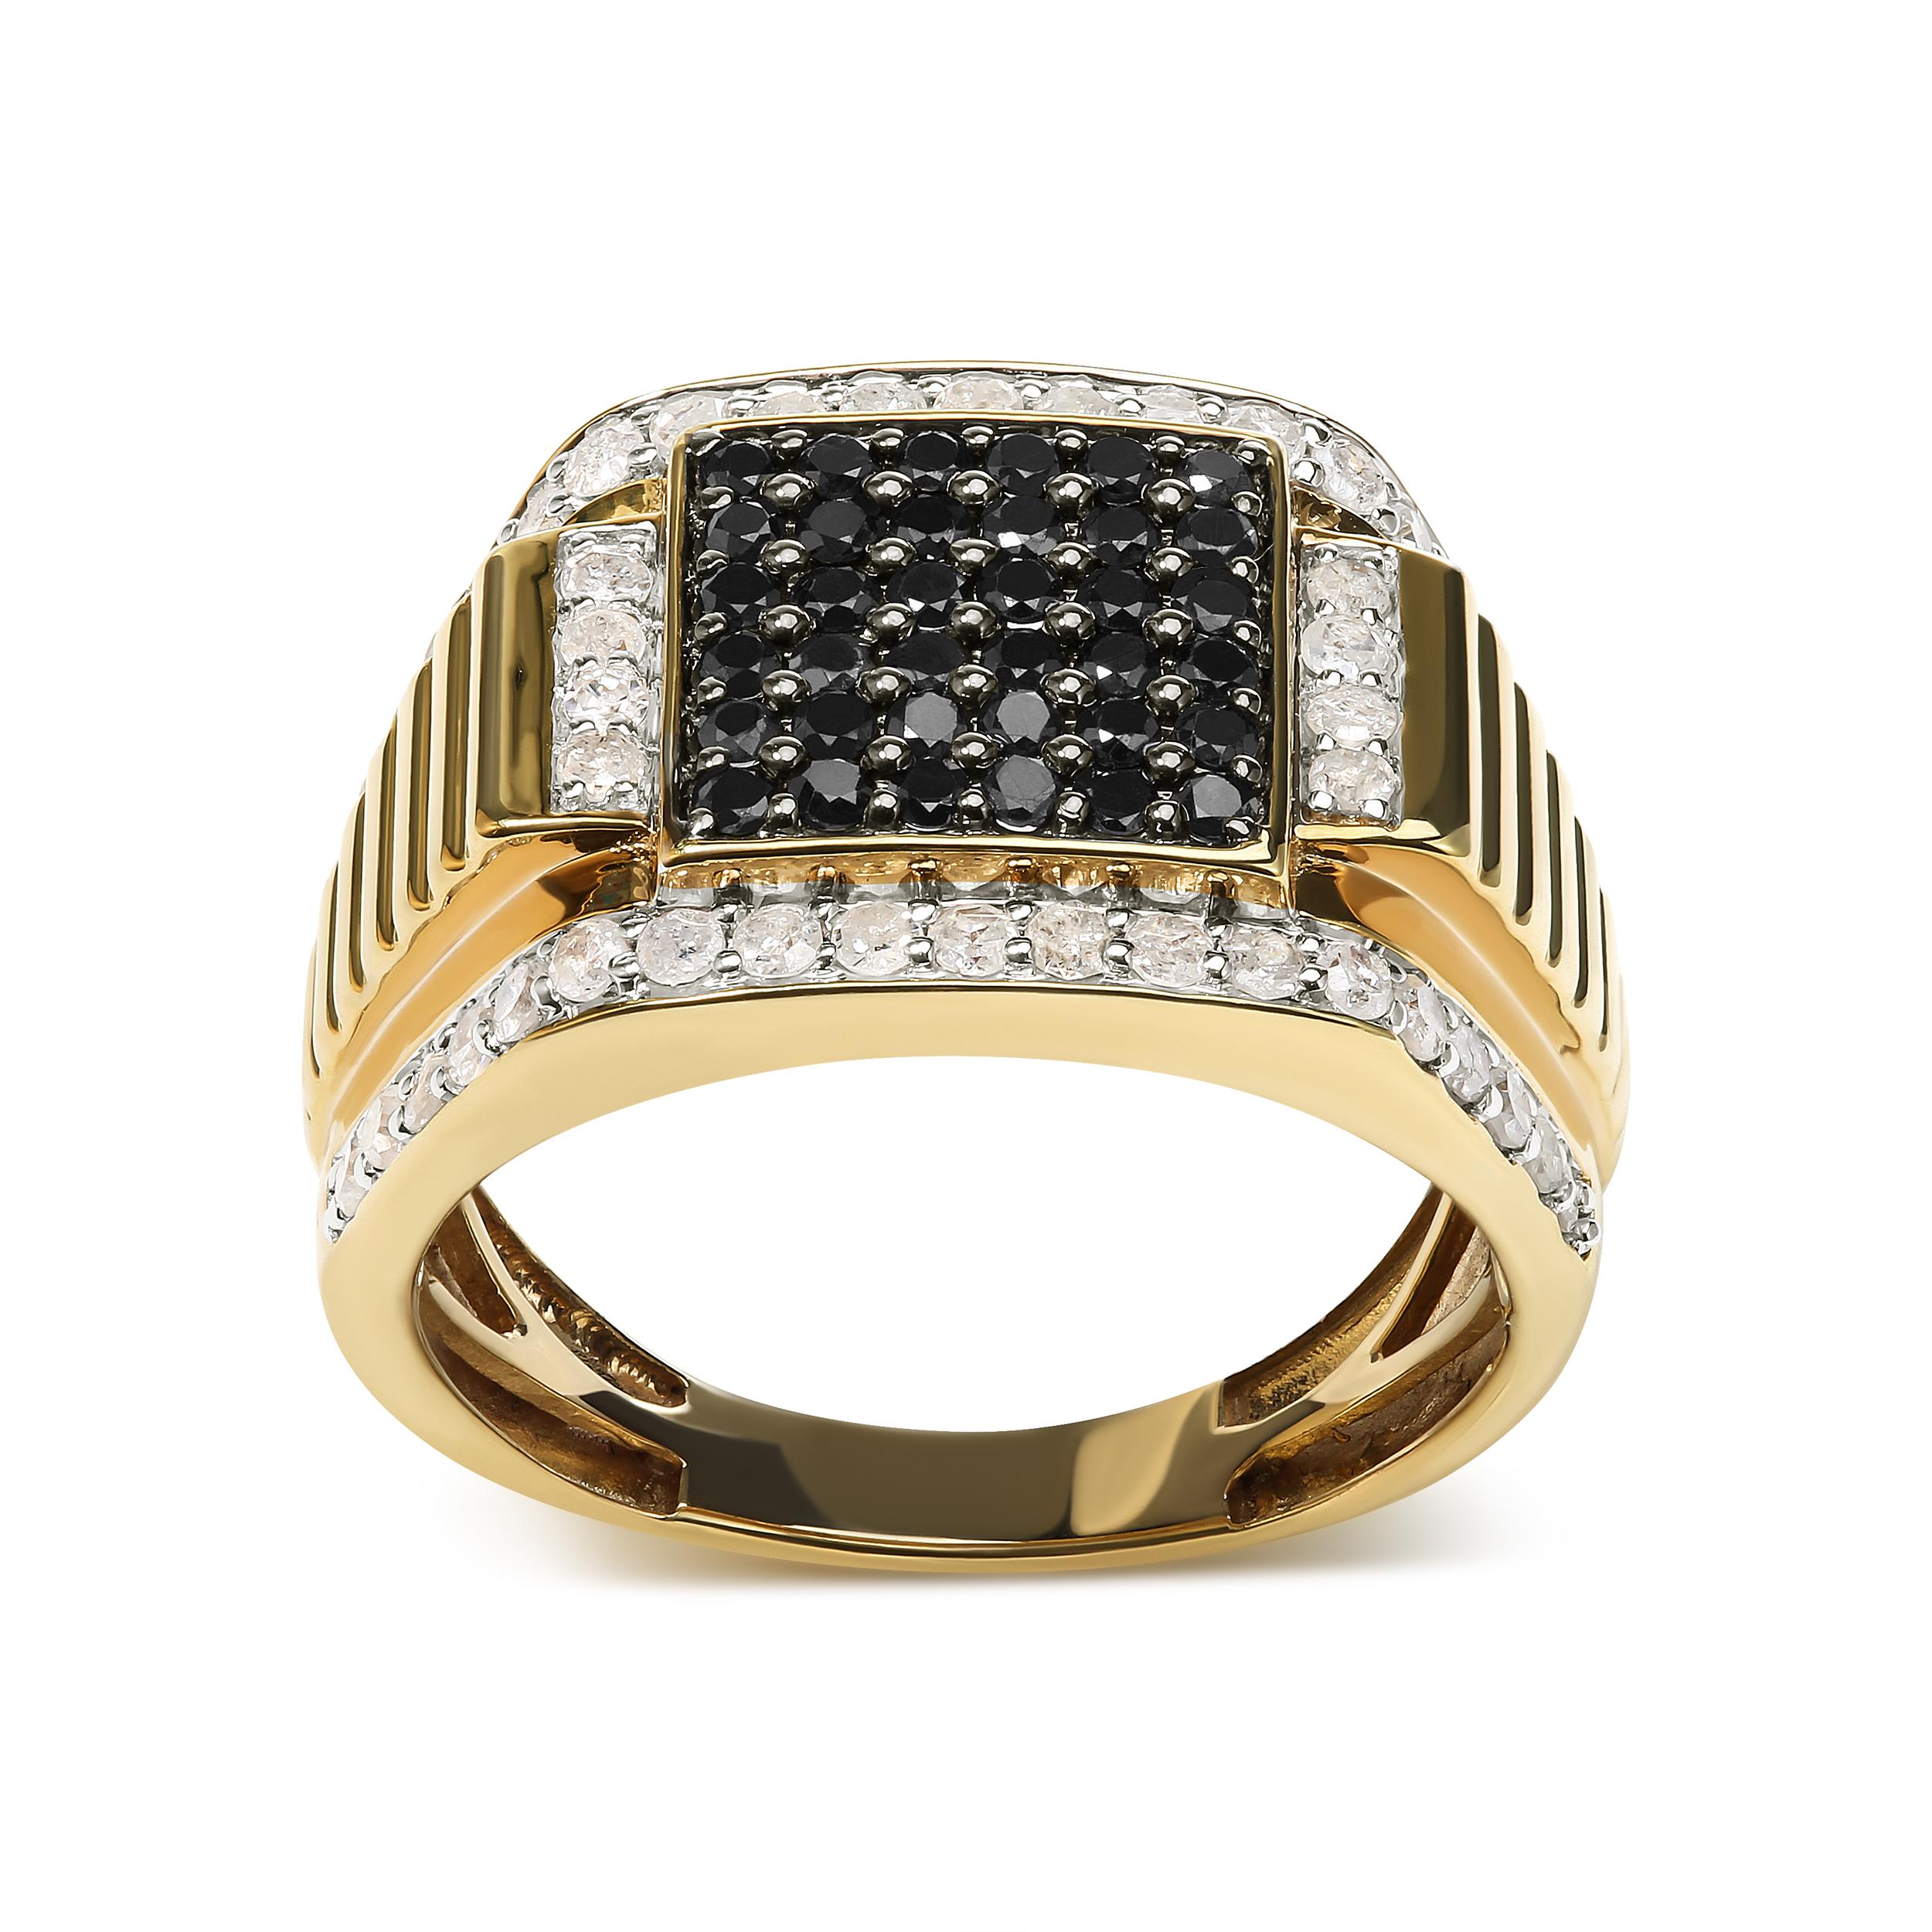 Introducing a masterpiece that exudes elegance and sophistication, this Men's 10K Yellow Gold Cluster Ring is a true symbol of refined masculinity. Crafted with meticulous attention to detail, this ring boasts a stunning array of 82 round, natural